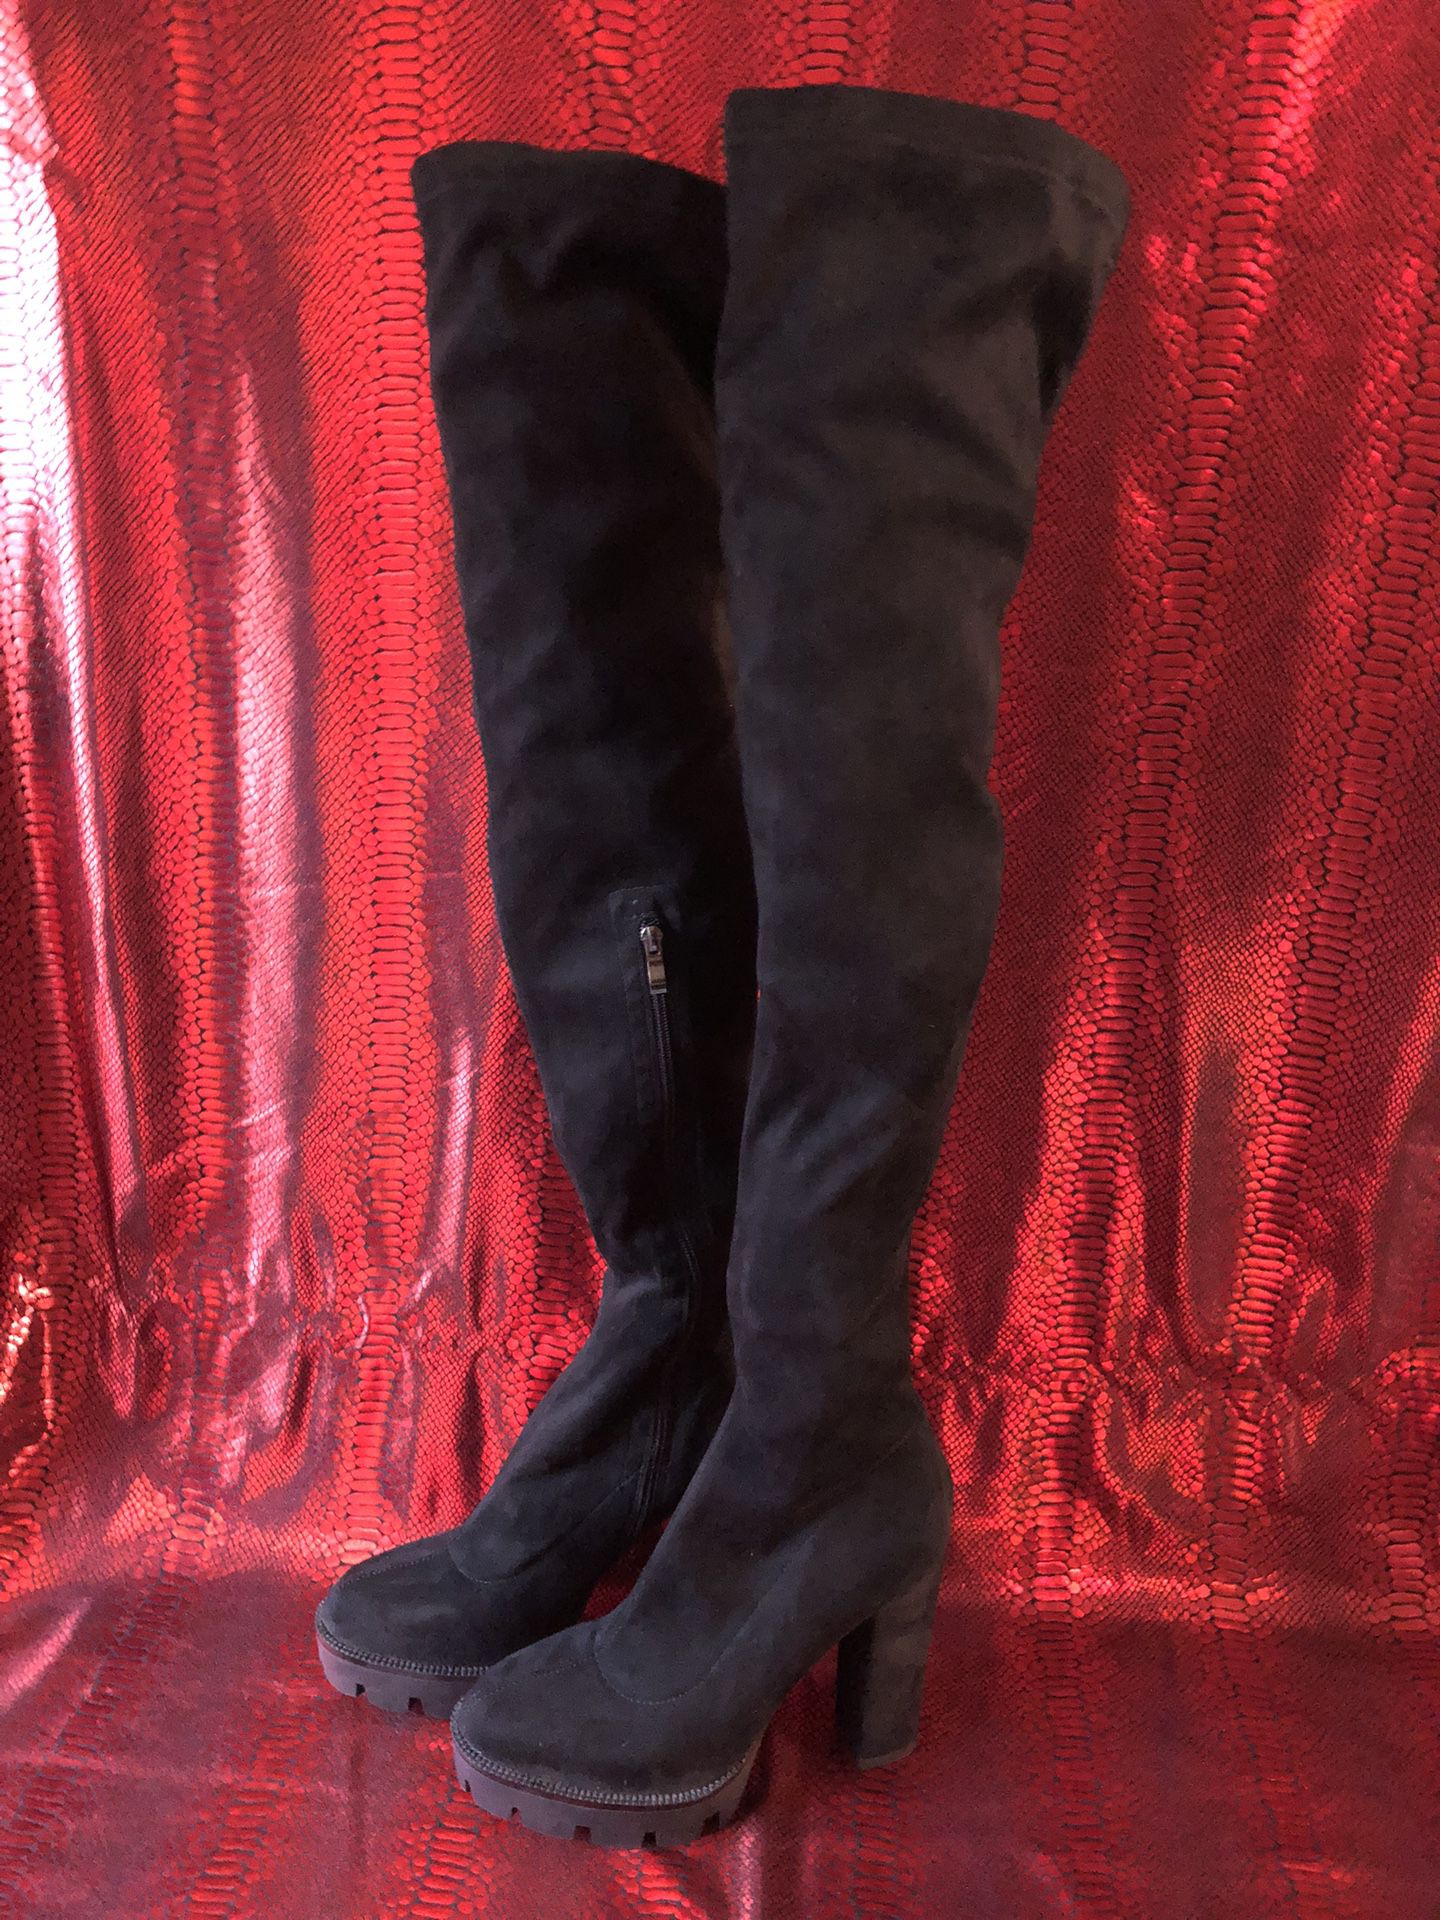 Thigh High Boots - Size 9.5